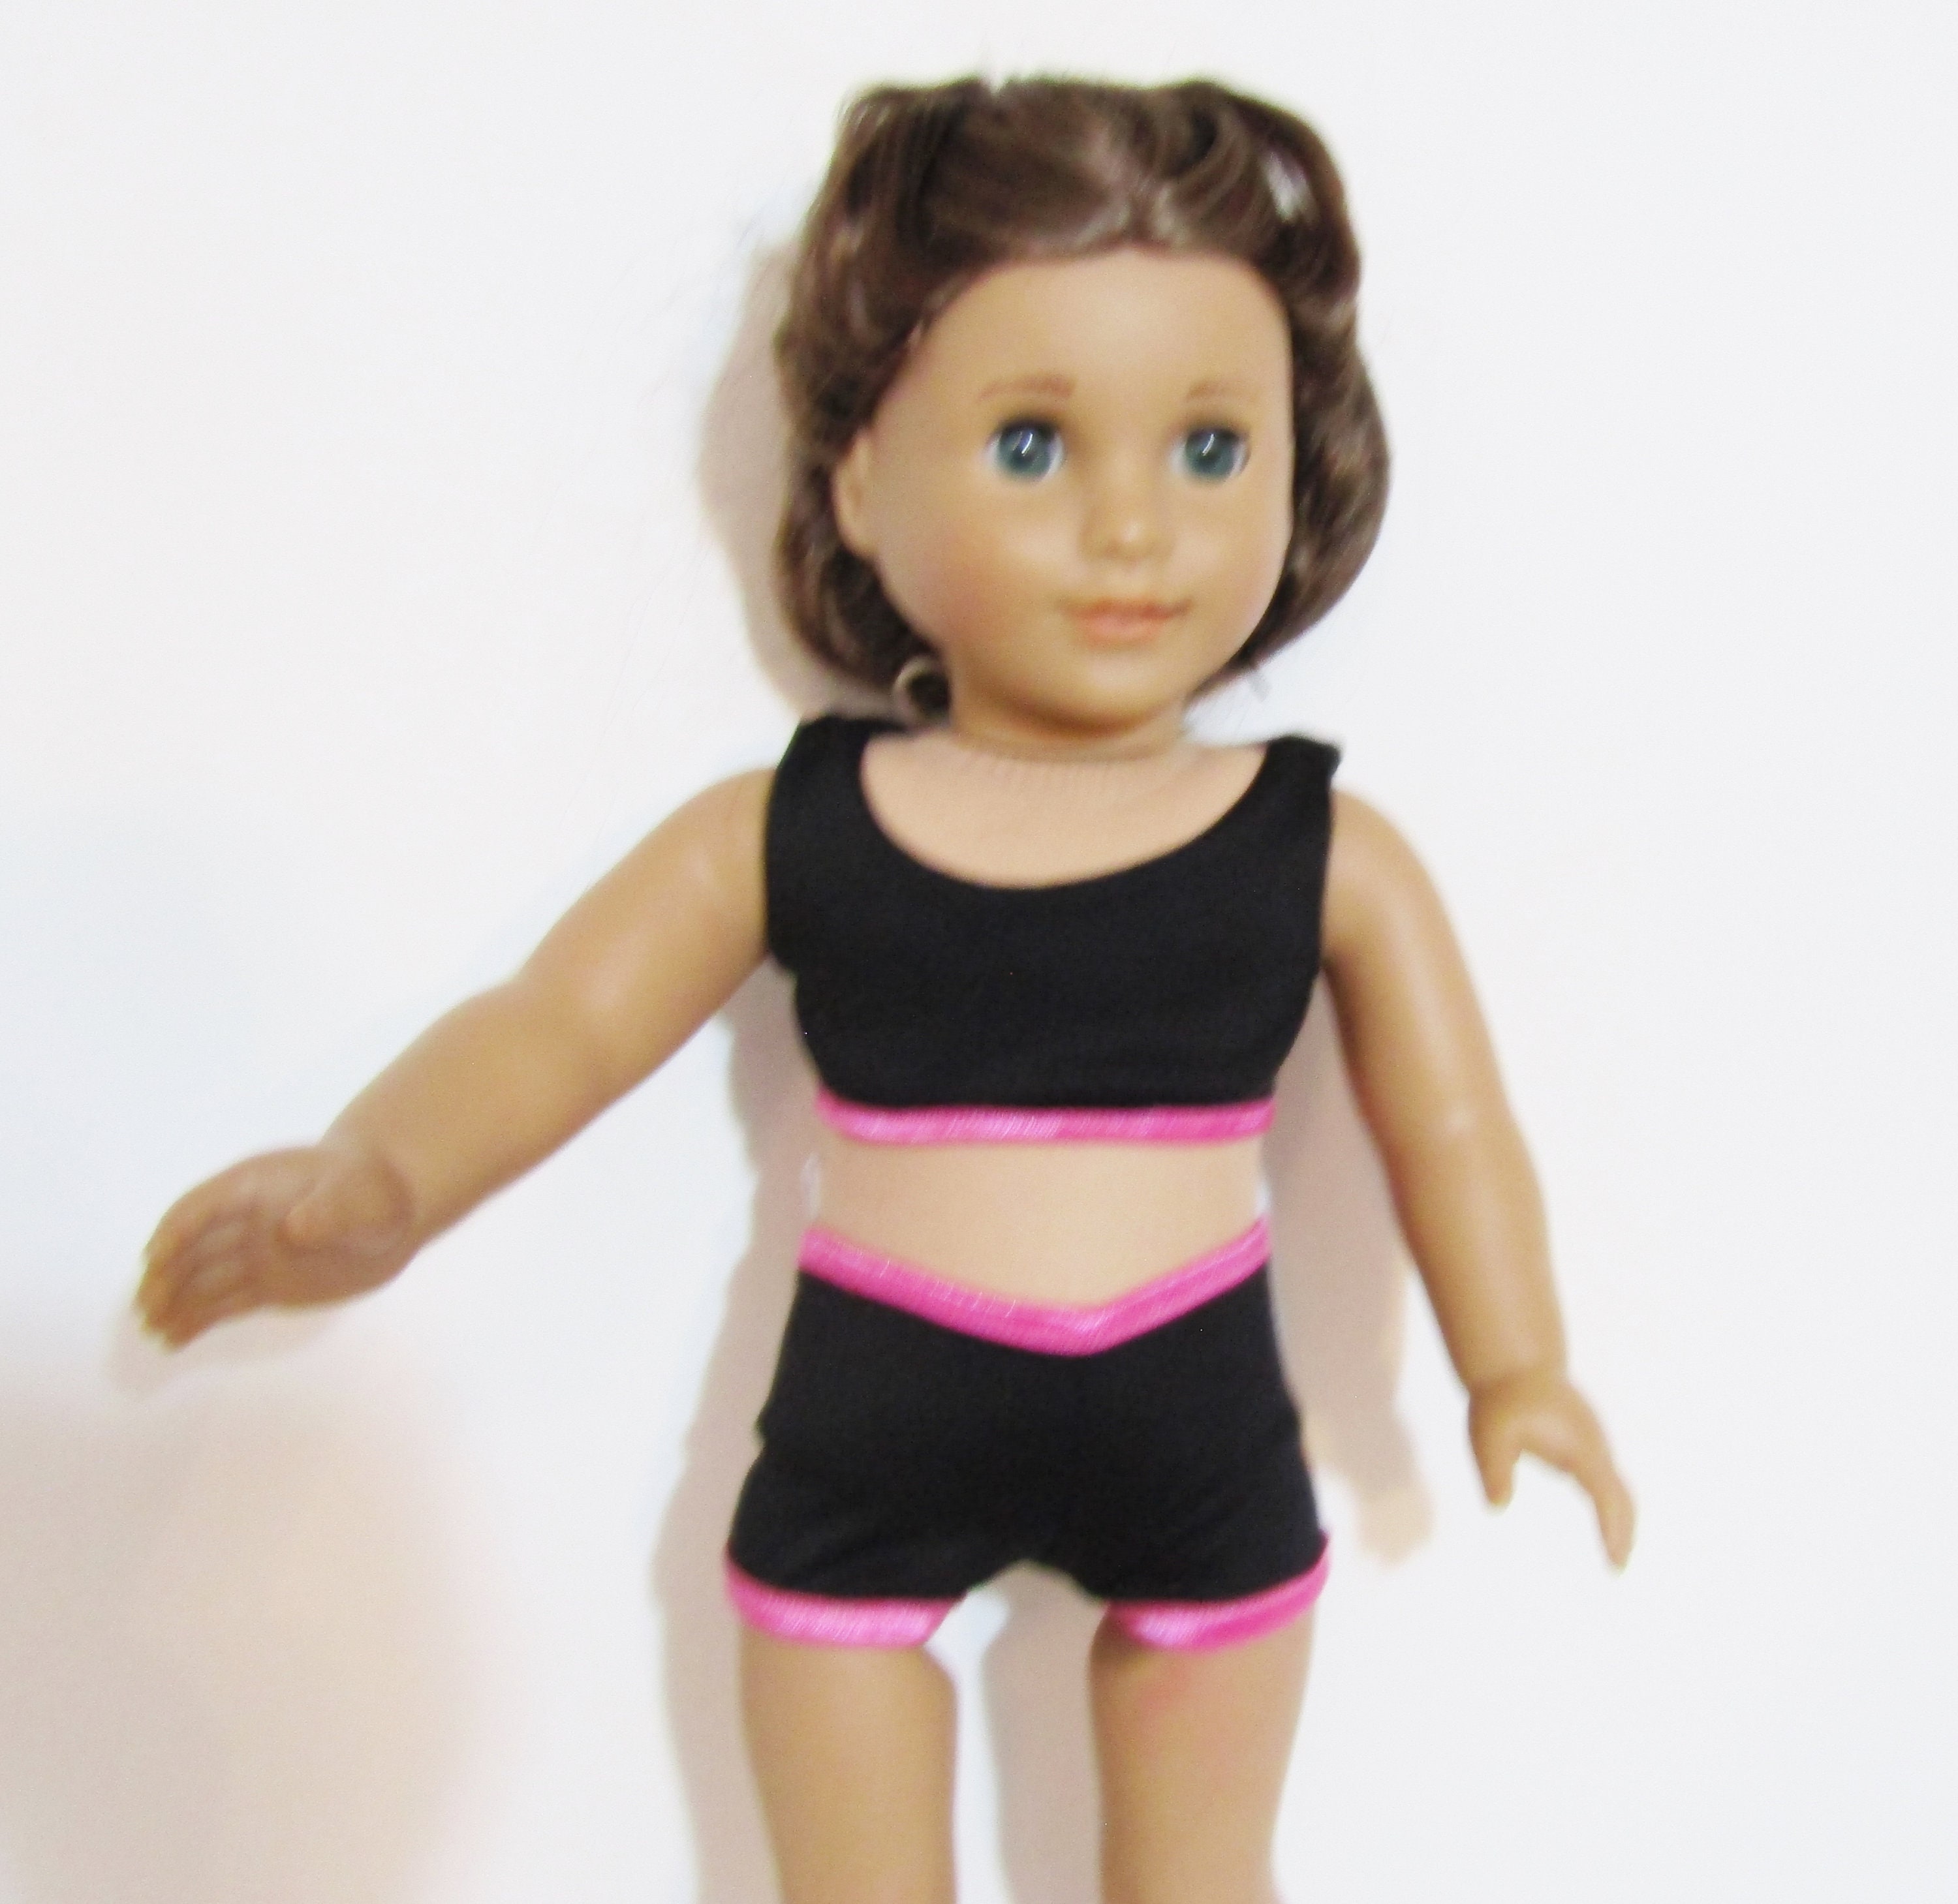 Boy Cut Panties and Sports Bra Made to Fit American Girl Doll 18